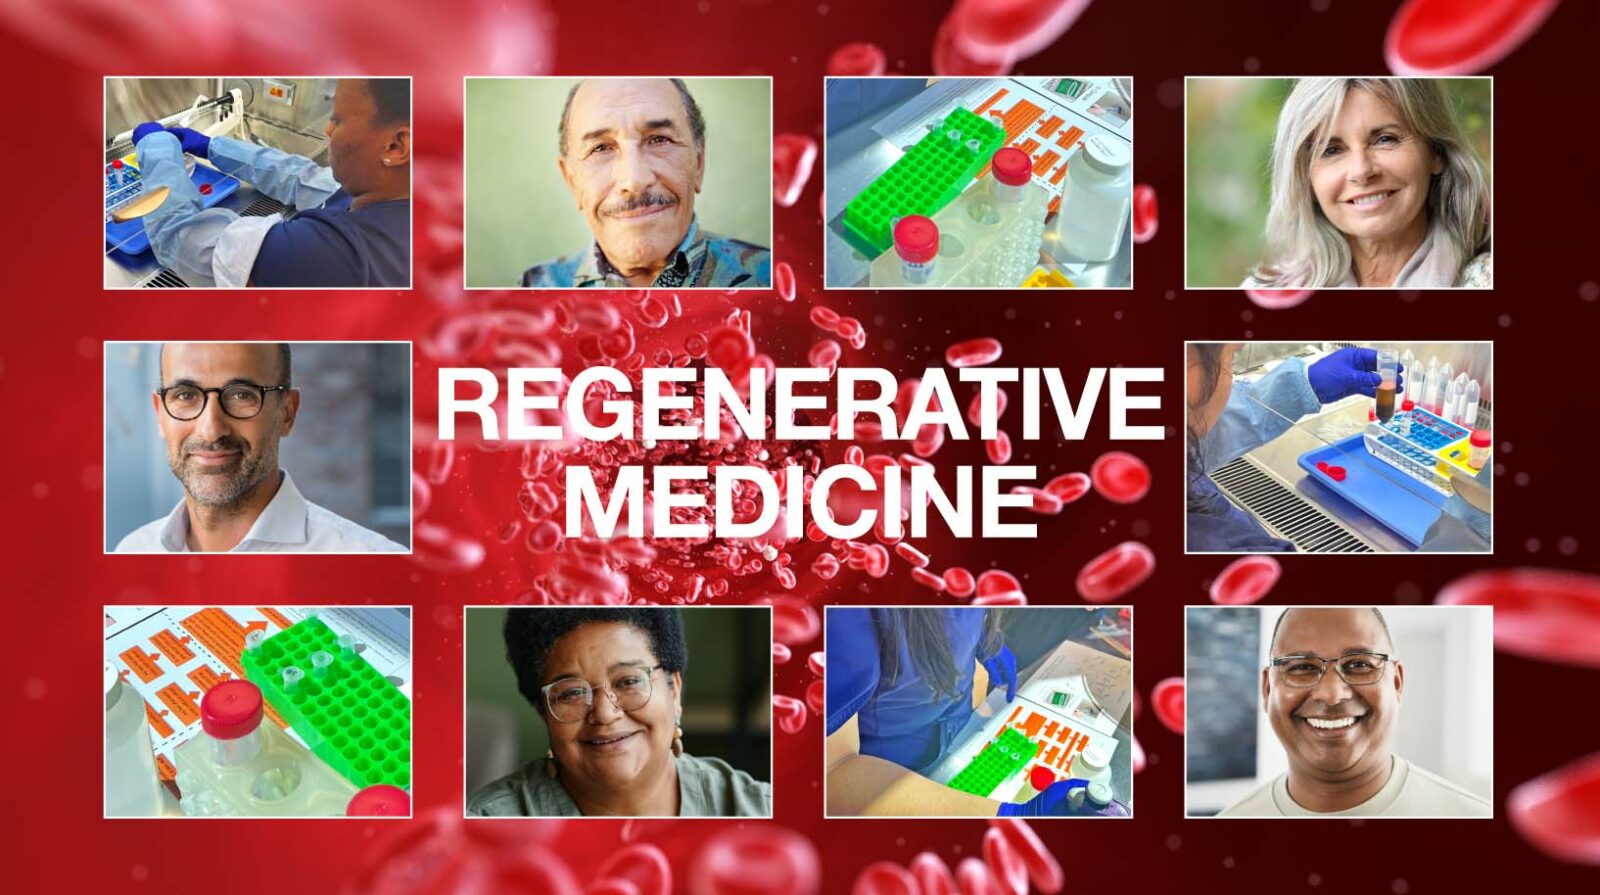 Regenerative medicine photo with people and background of blood cells